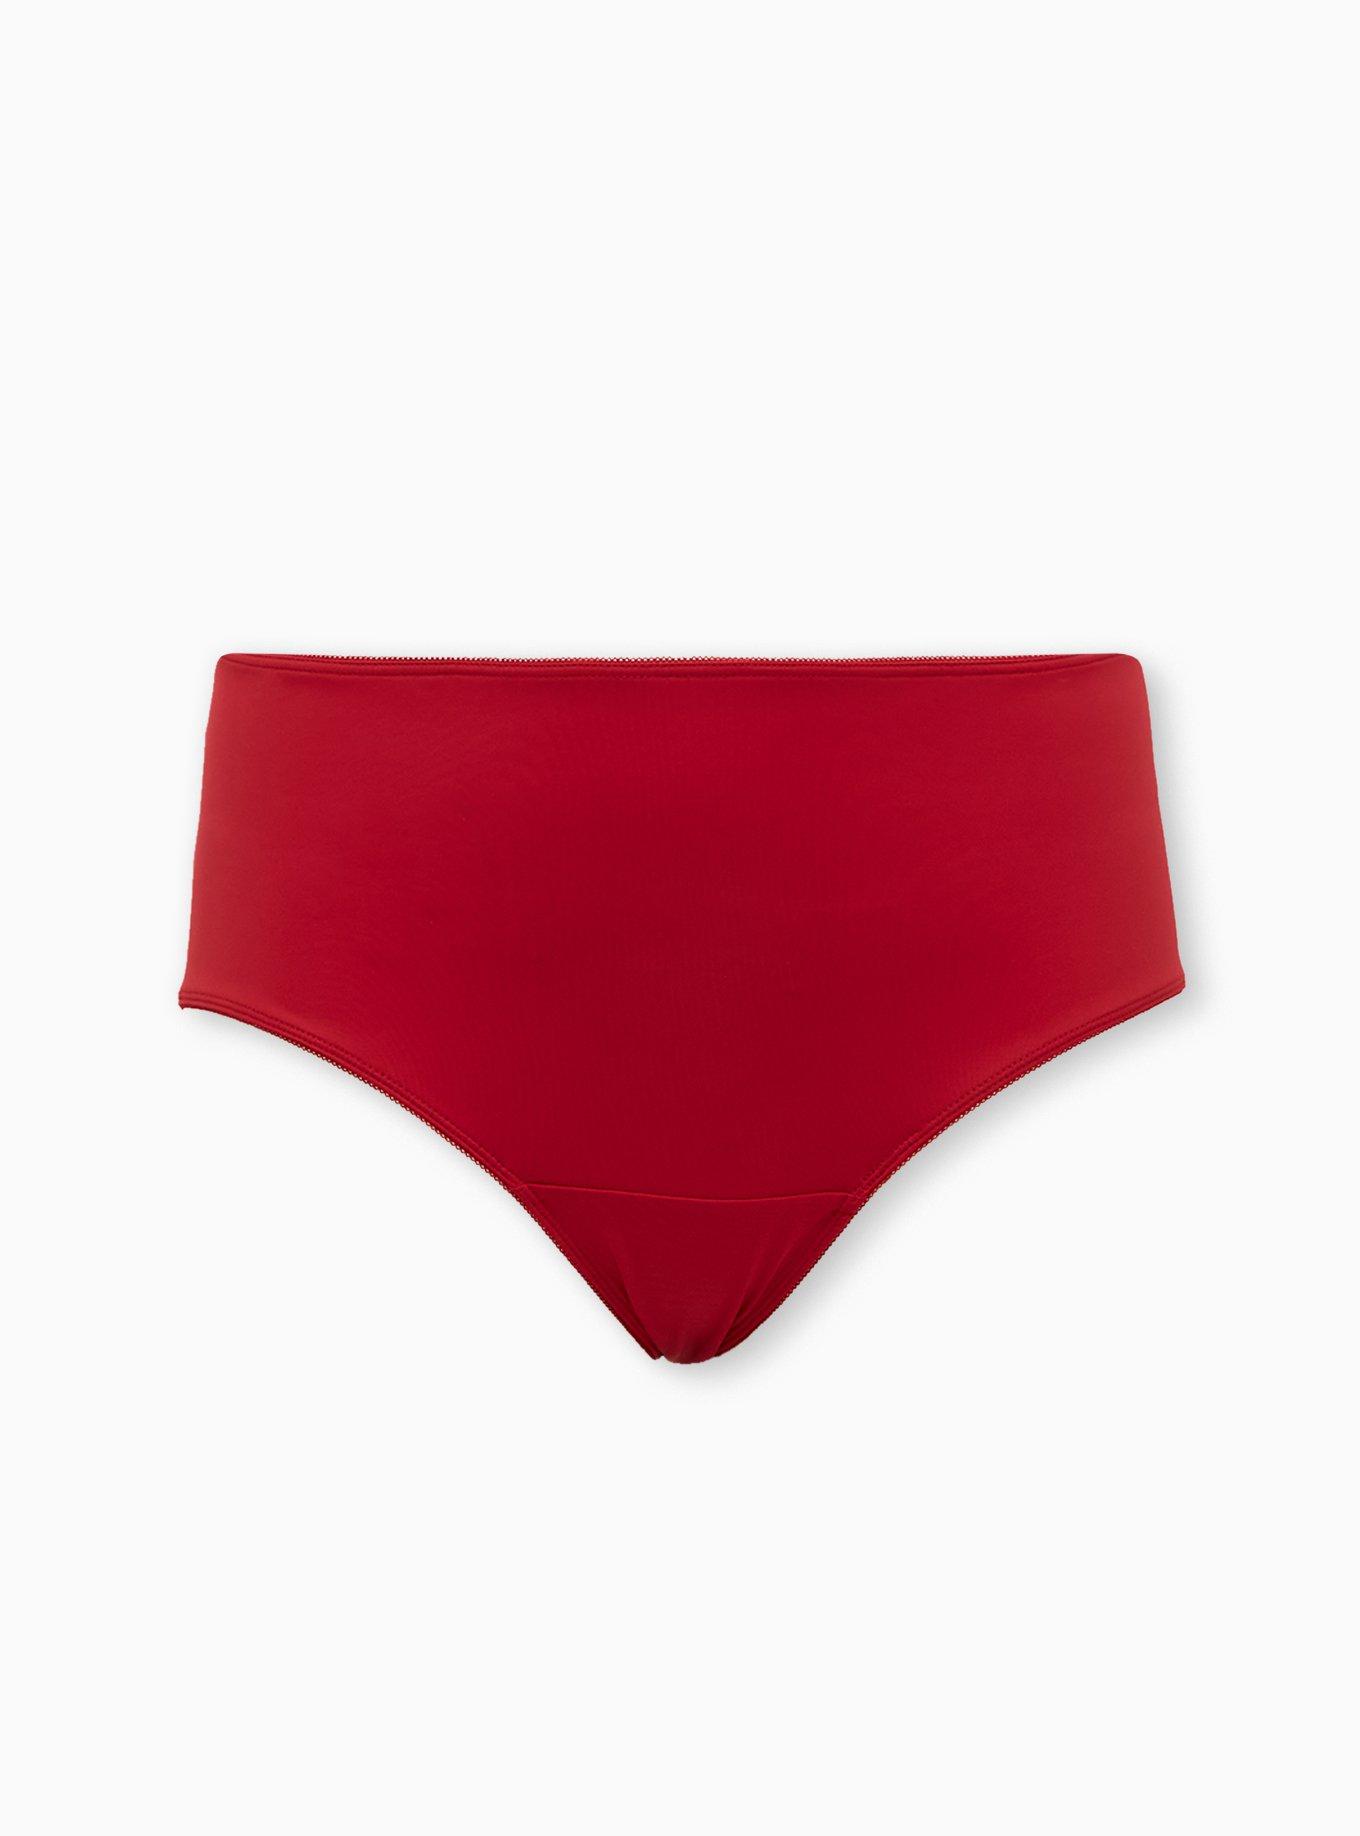 Mix & Match Panties  4 for $36 – Lounge Underwear